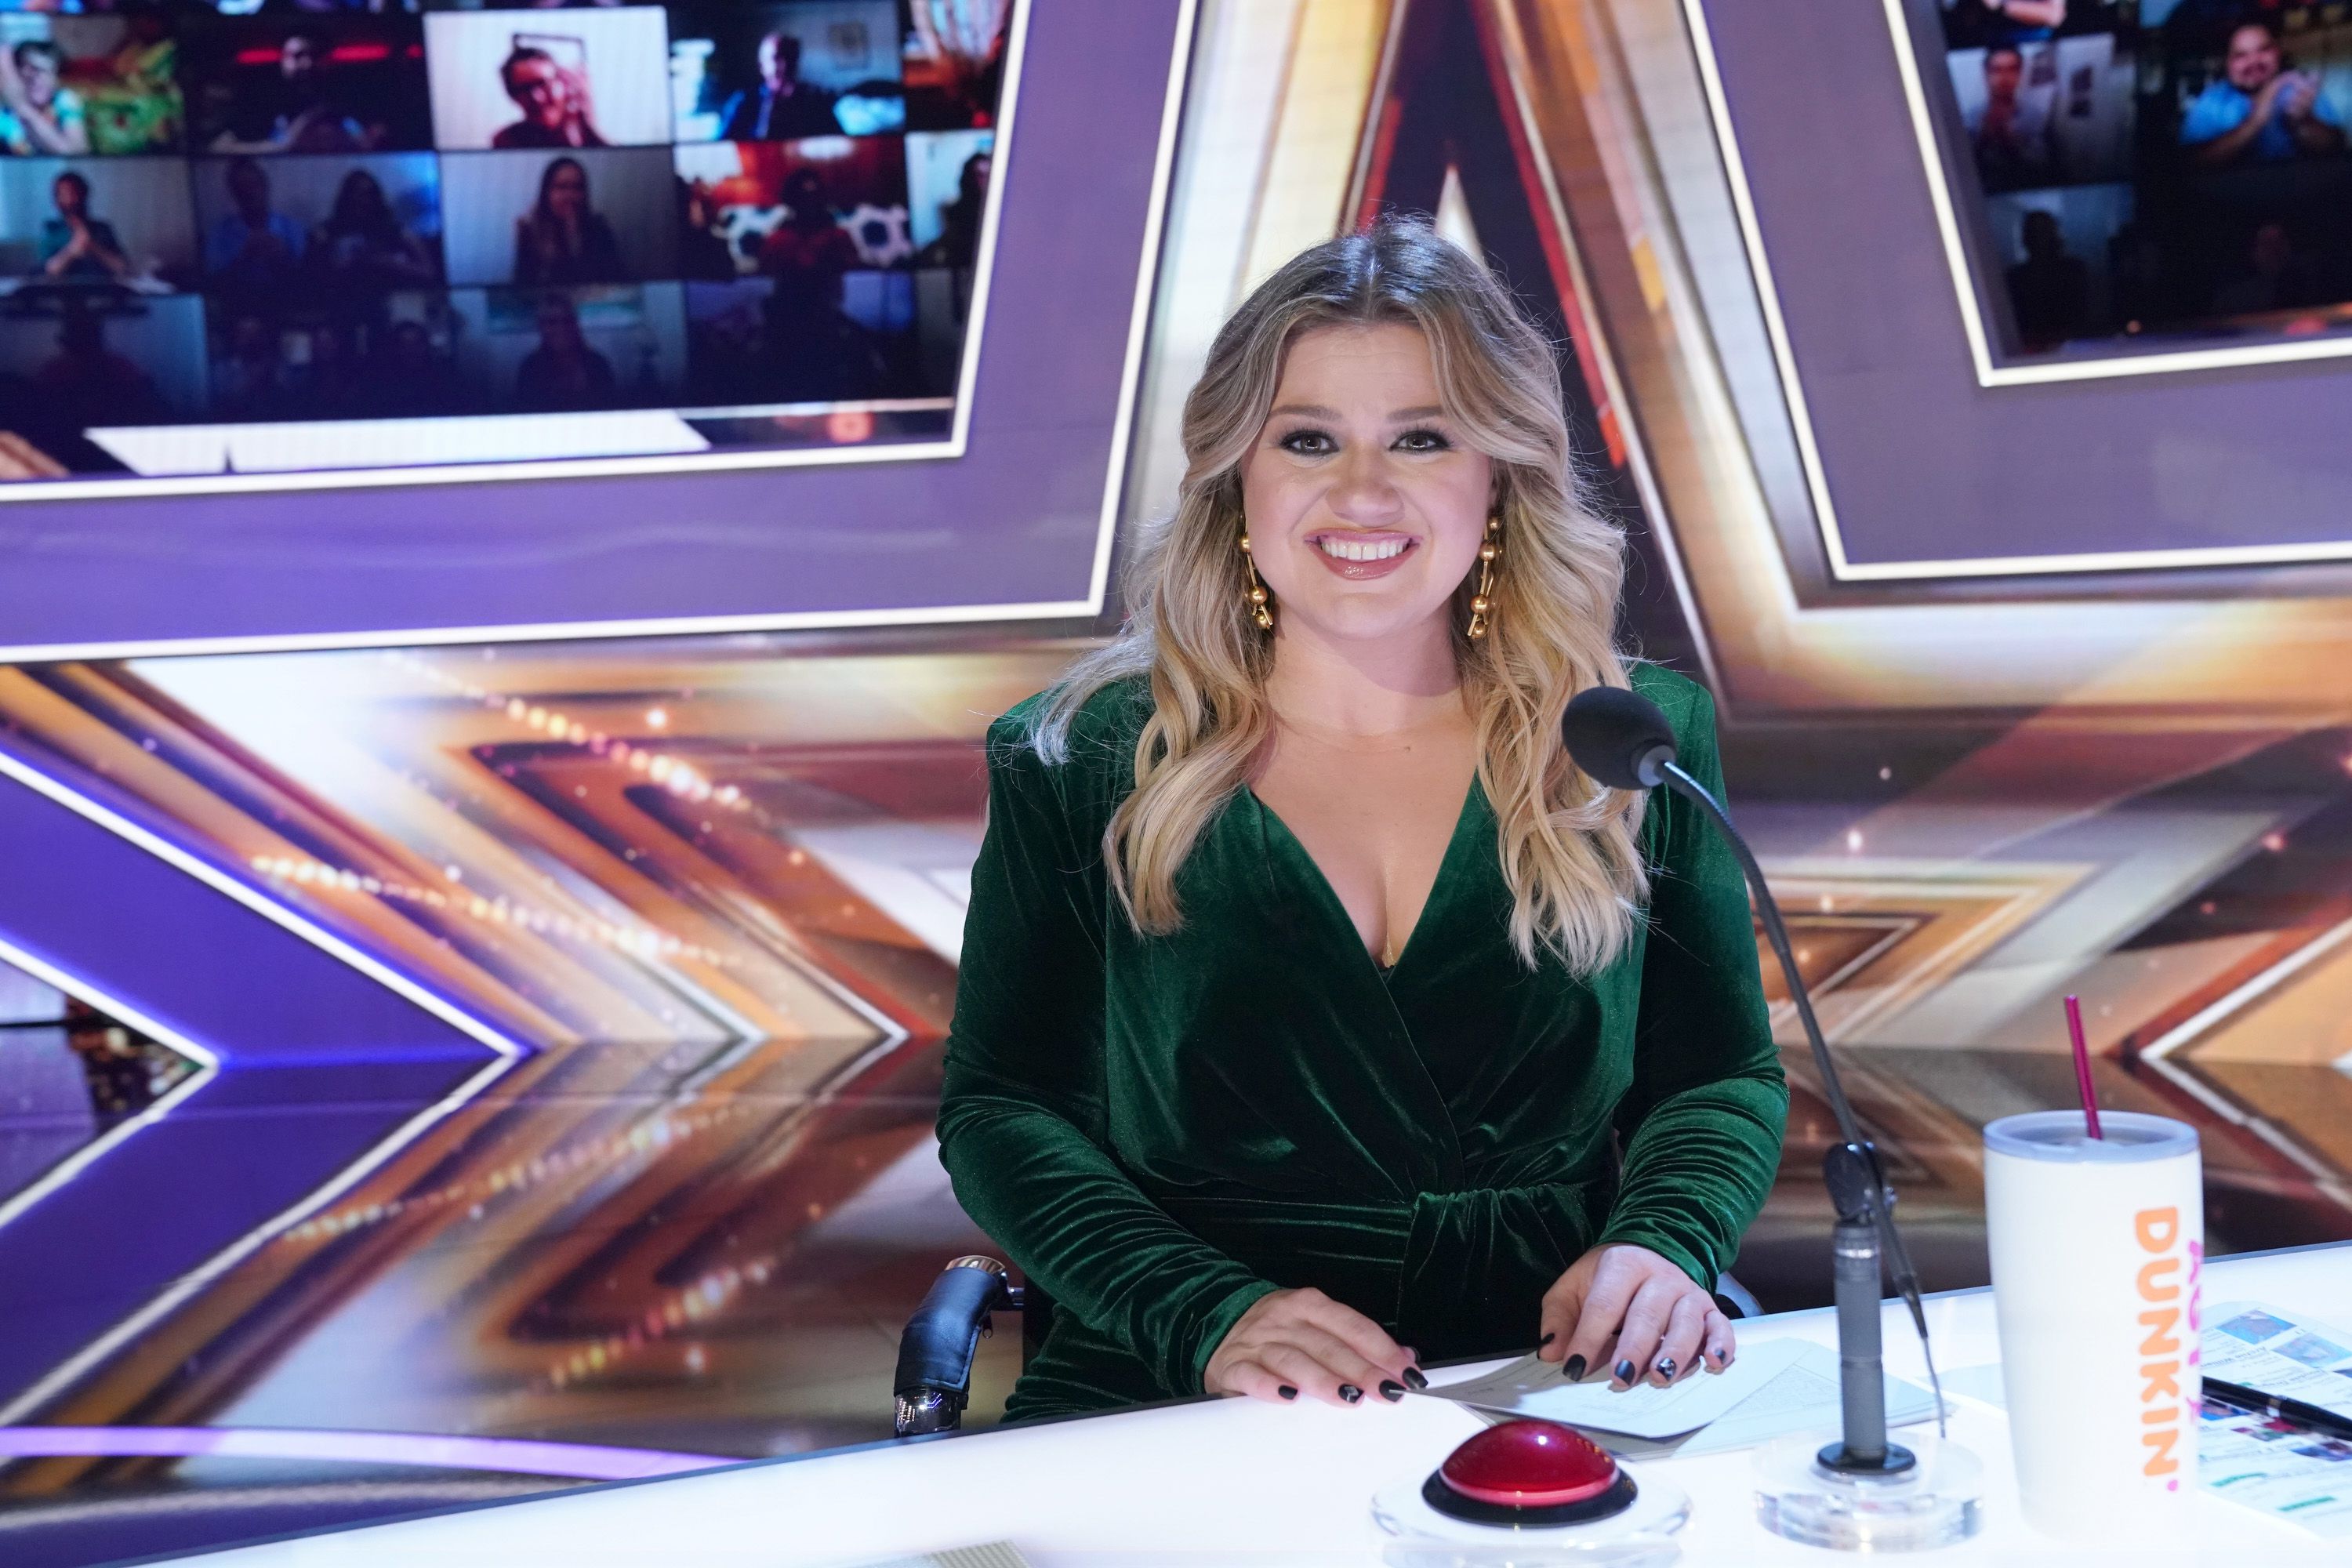 Kelly Clarkson on America's Got Talent "Live Show 1" Episode 1511 | Getty Images 